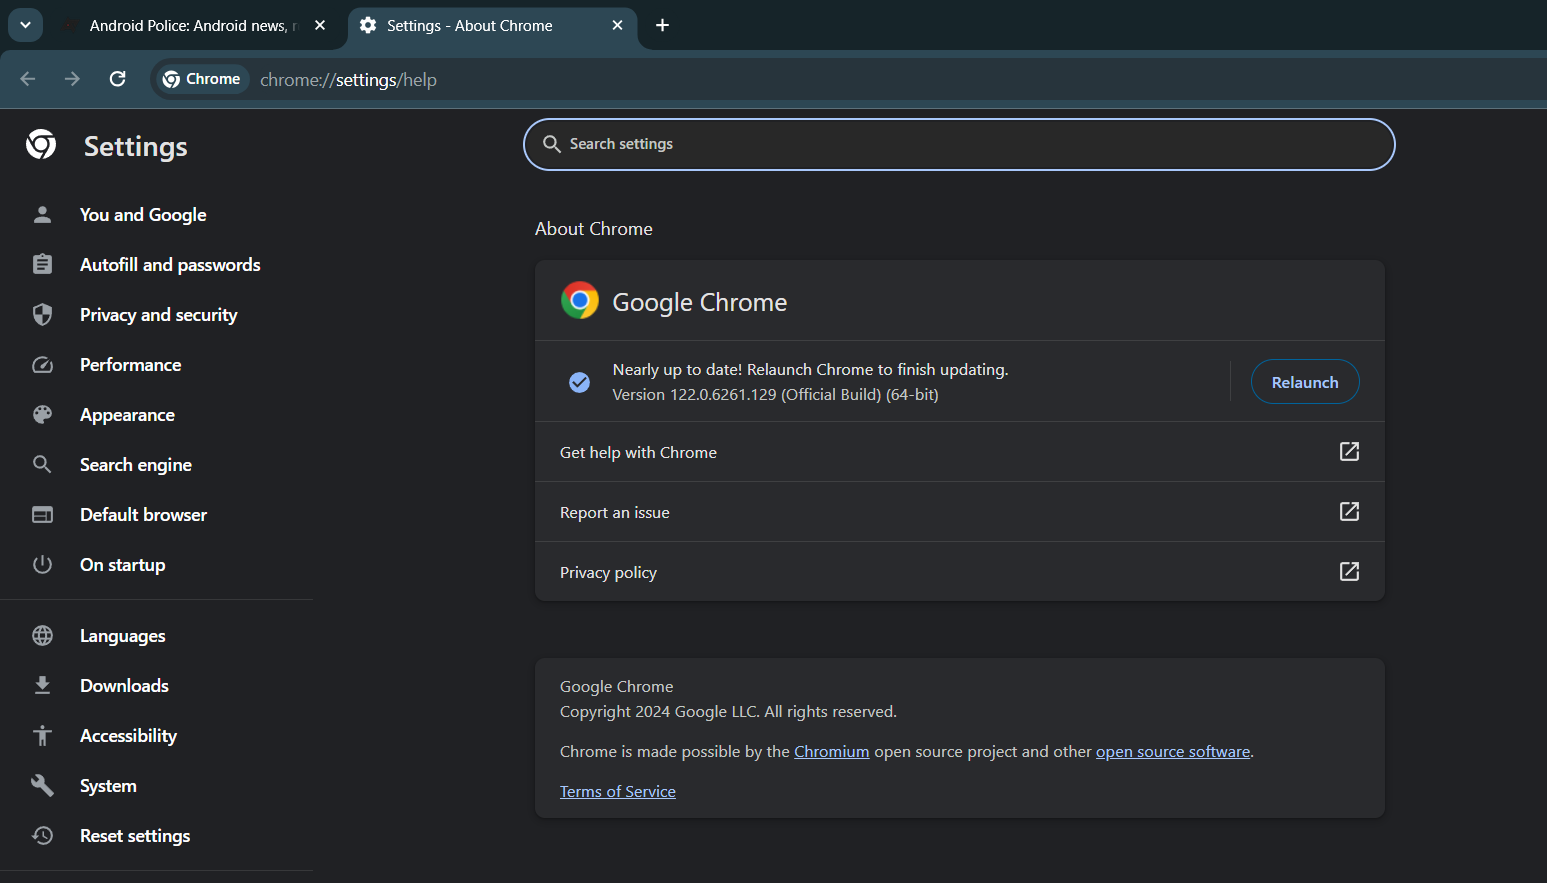 Screenshot showing the About Chrome section in Google Chrome